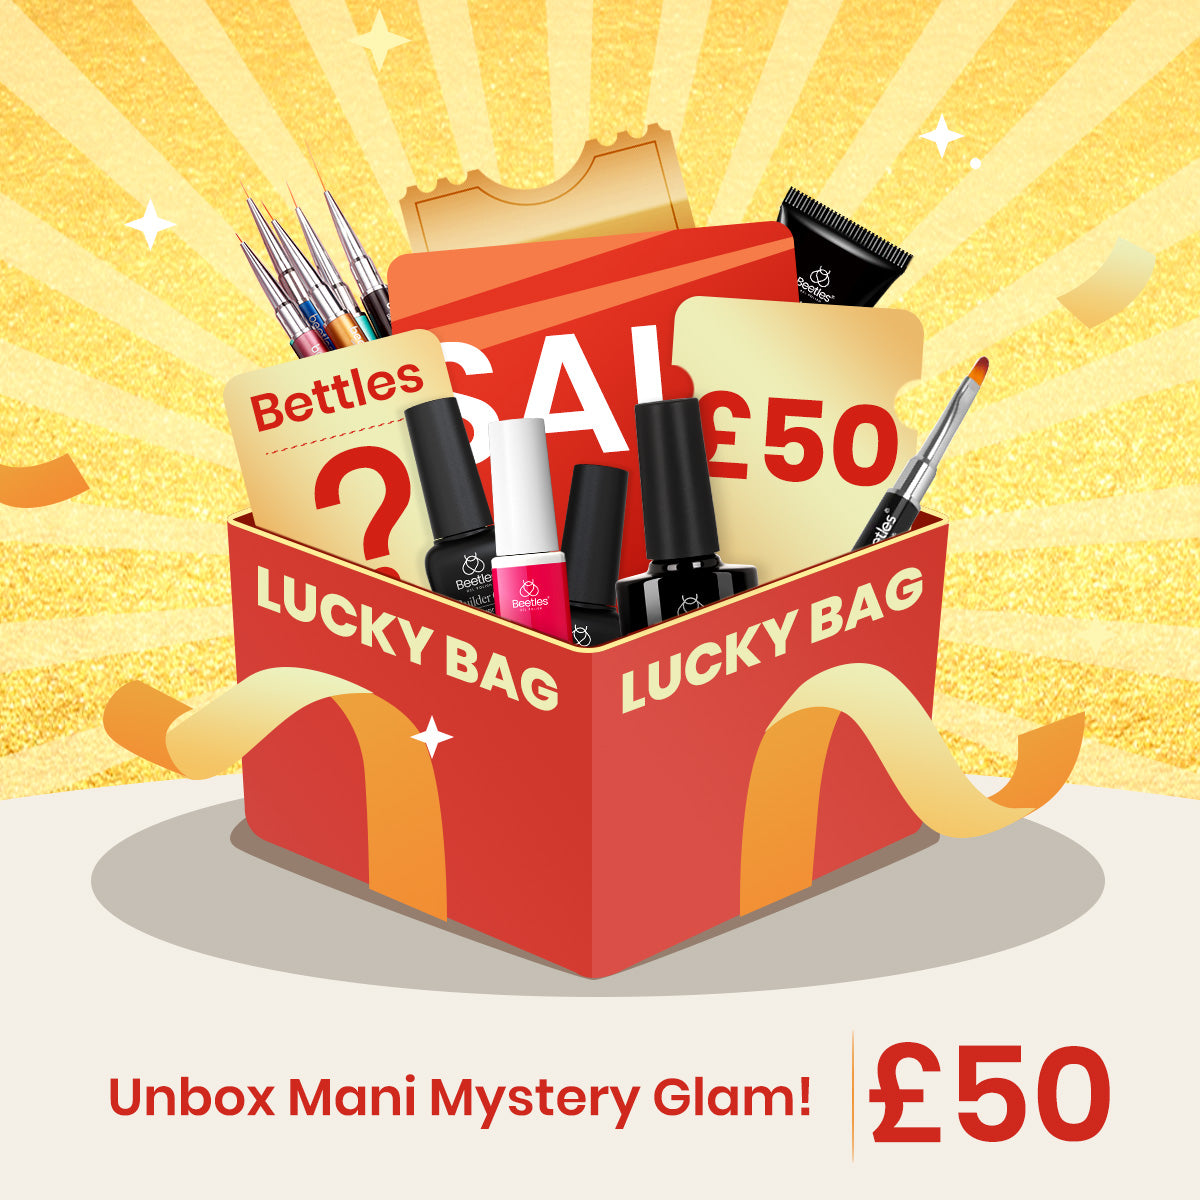 EXTRA SURPRISE FOR LUCKY BAG! – Beetles UK